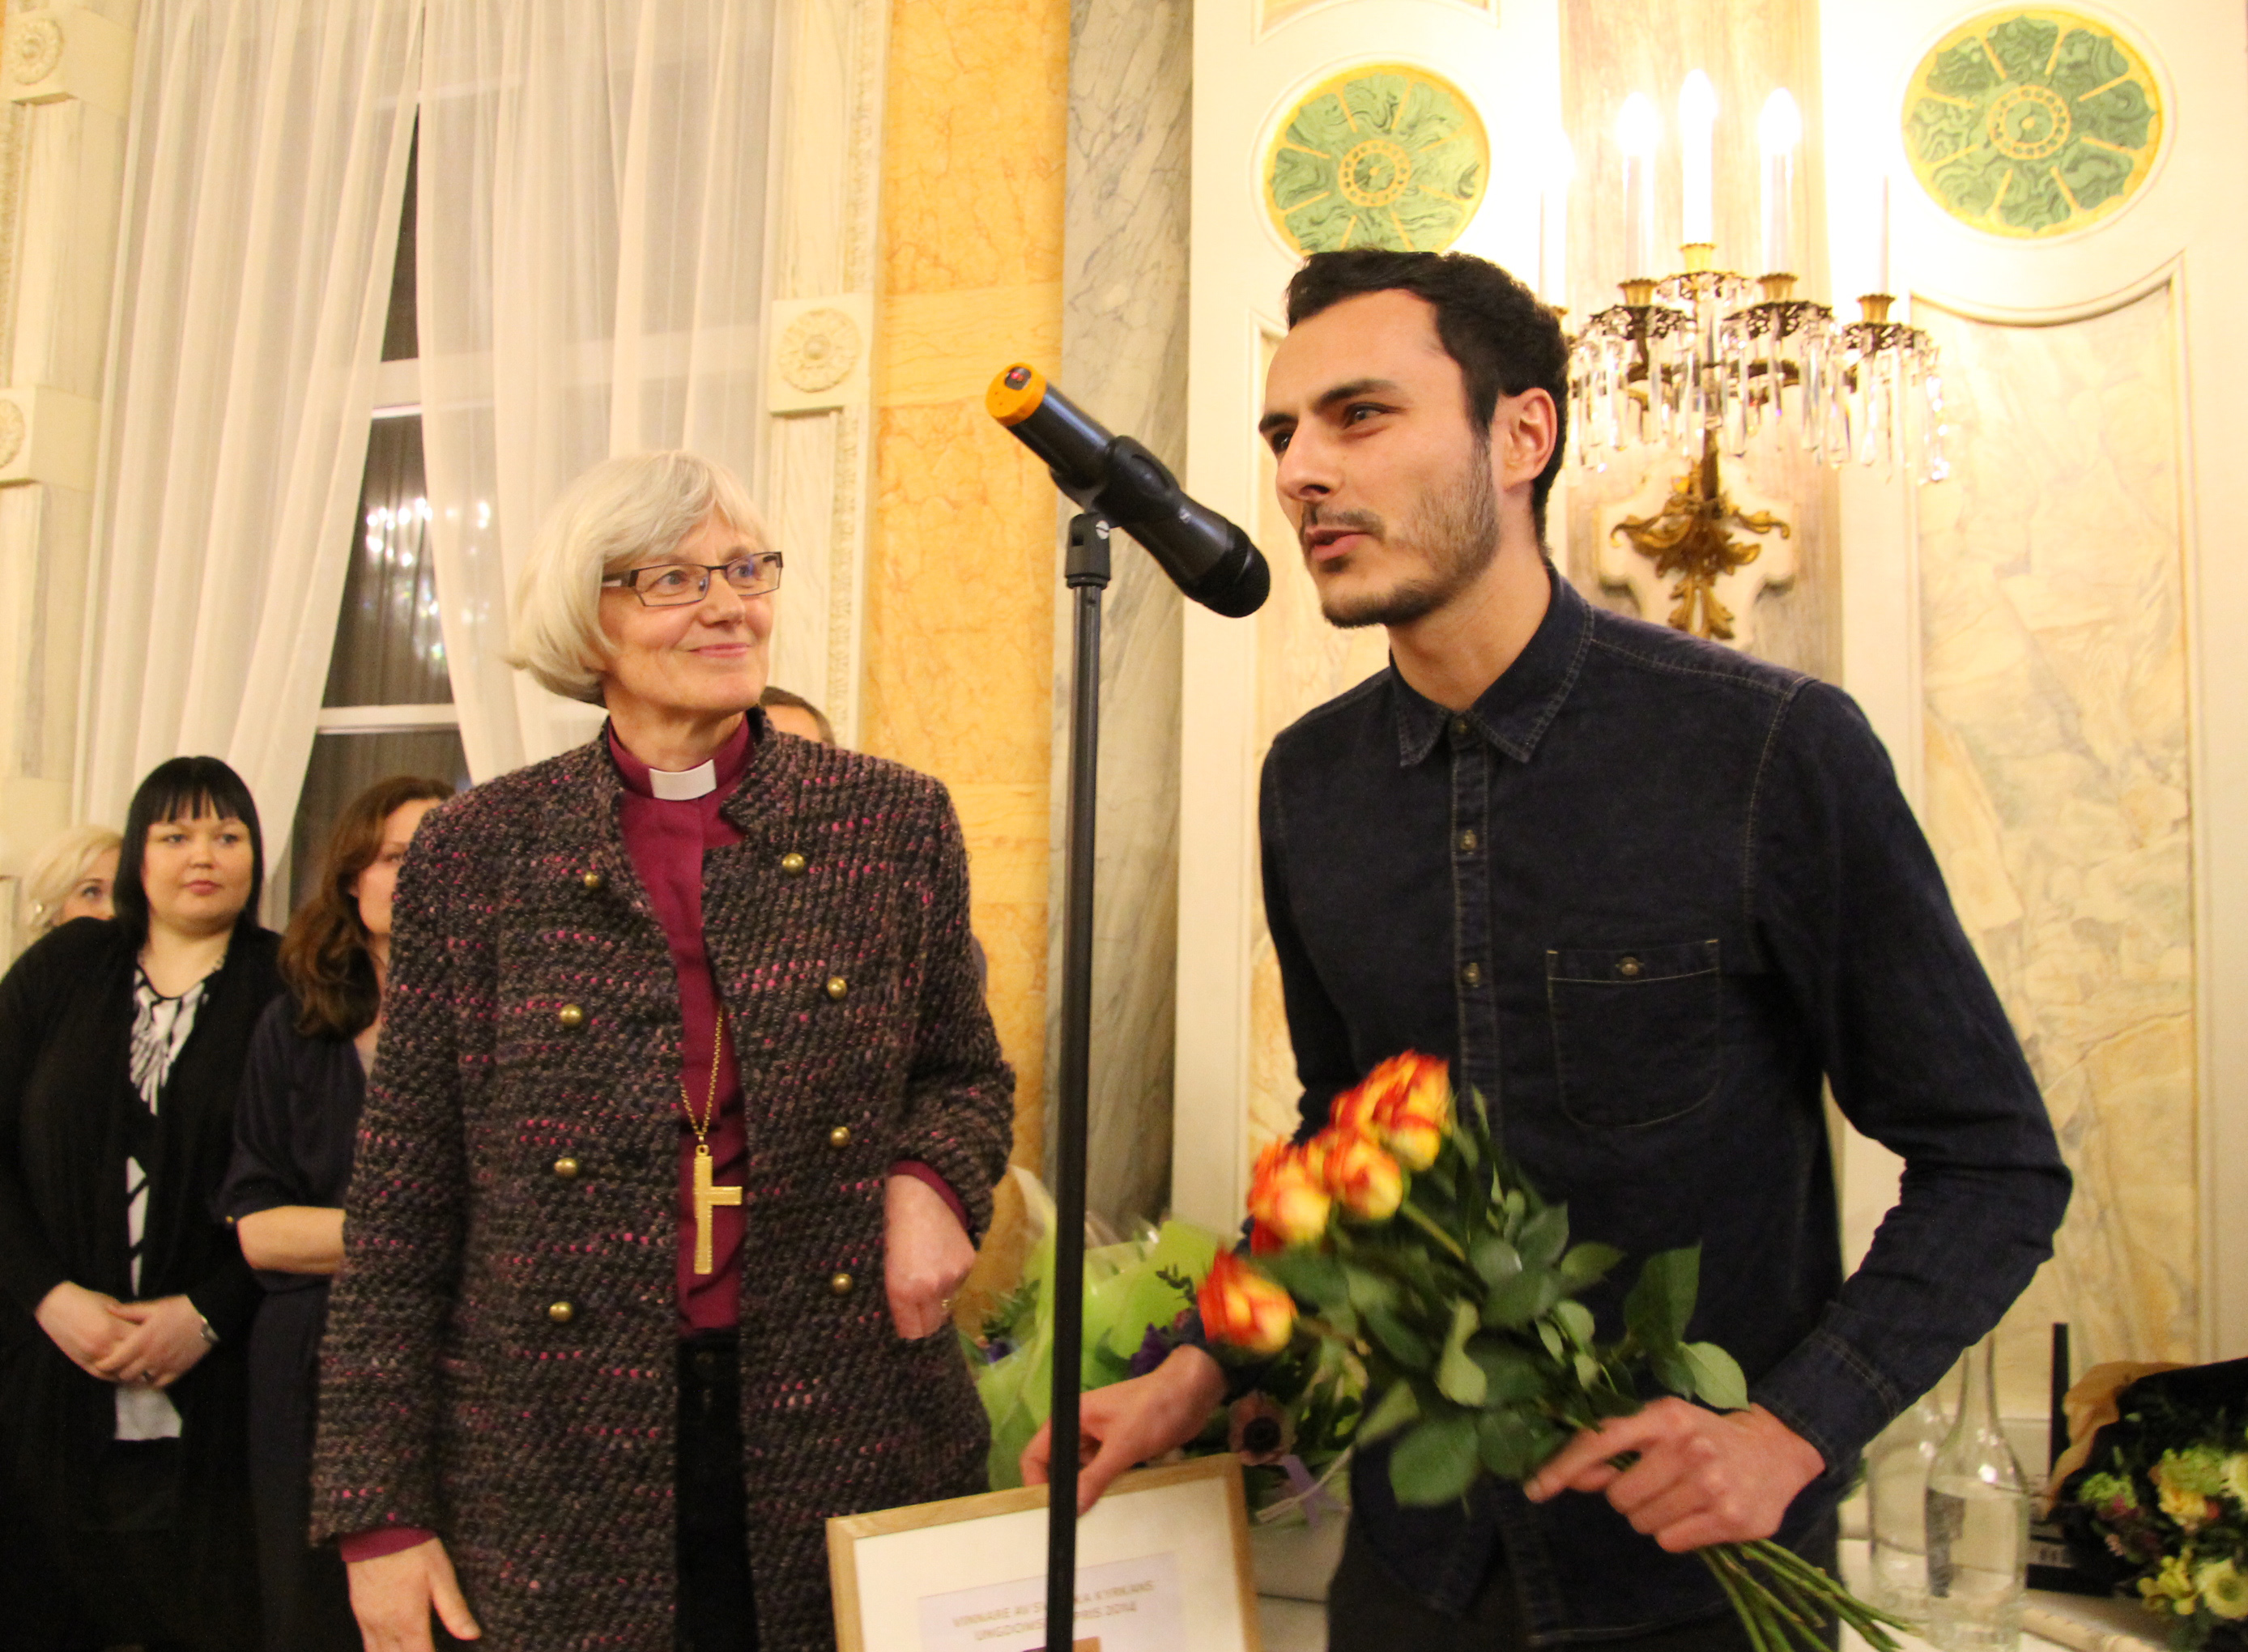 Bishop Antje Jackelen presenting Noof Ousellam with the award for Best Film at the BUFF Film Festival in Sweden. Photograph by Maria Lundström